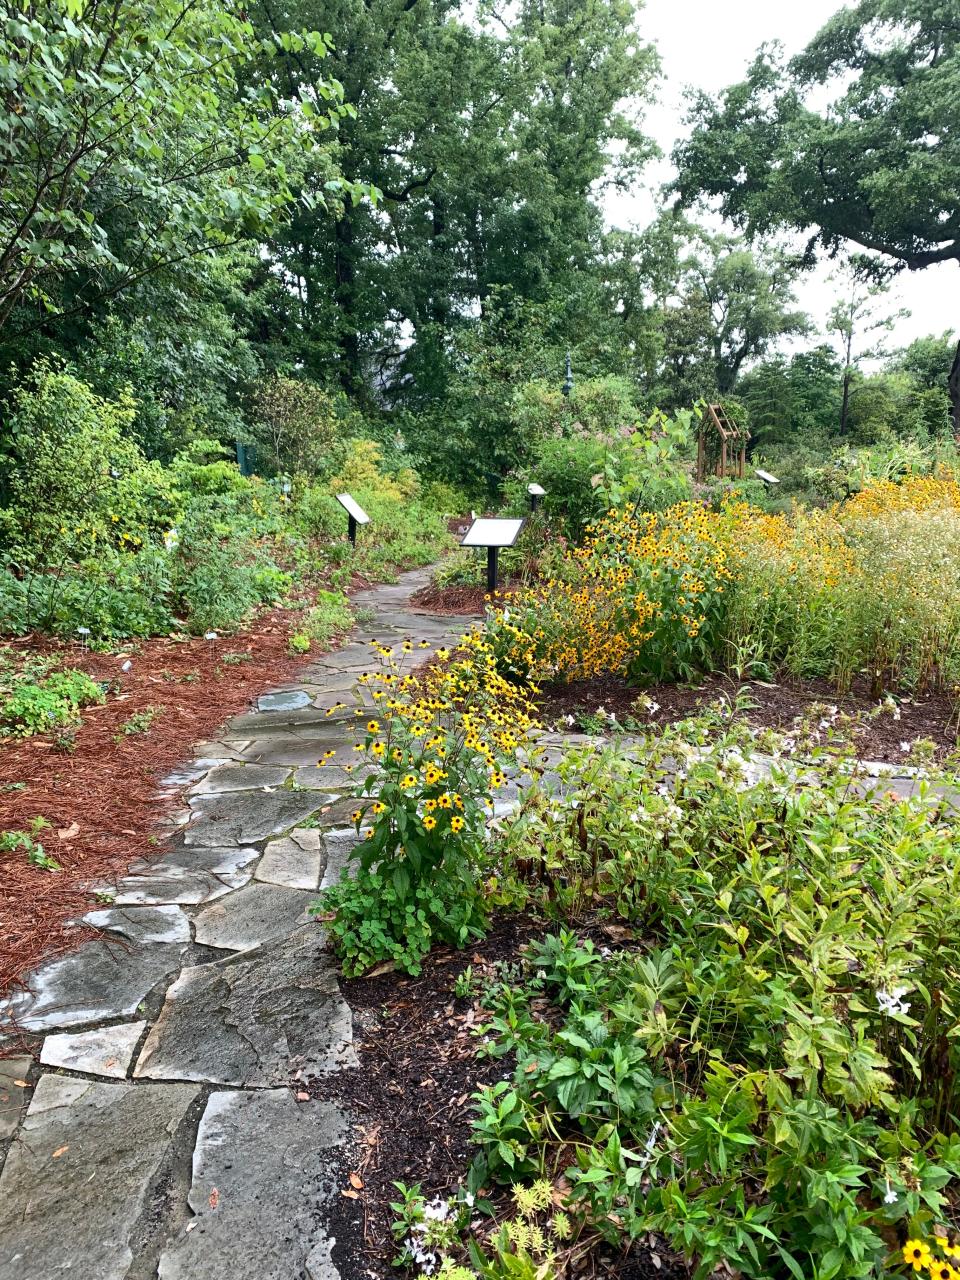 The native plant garden at the New Hanover County Arboretum is a smorgasbord for pollinators as well as a habitat for other wildlife.